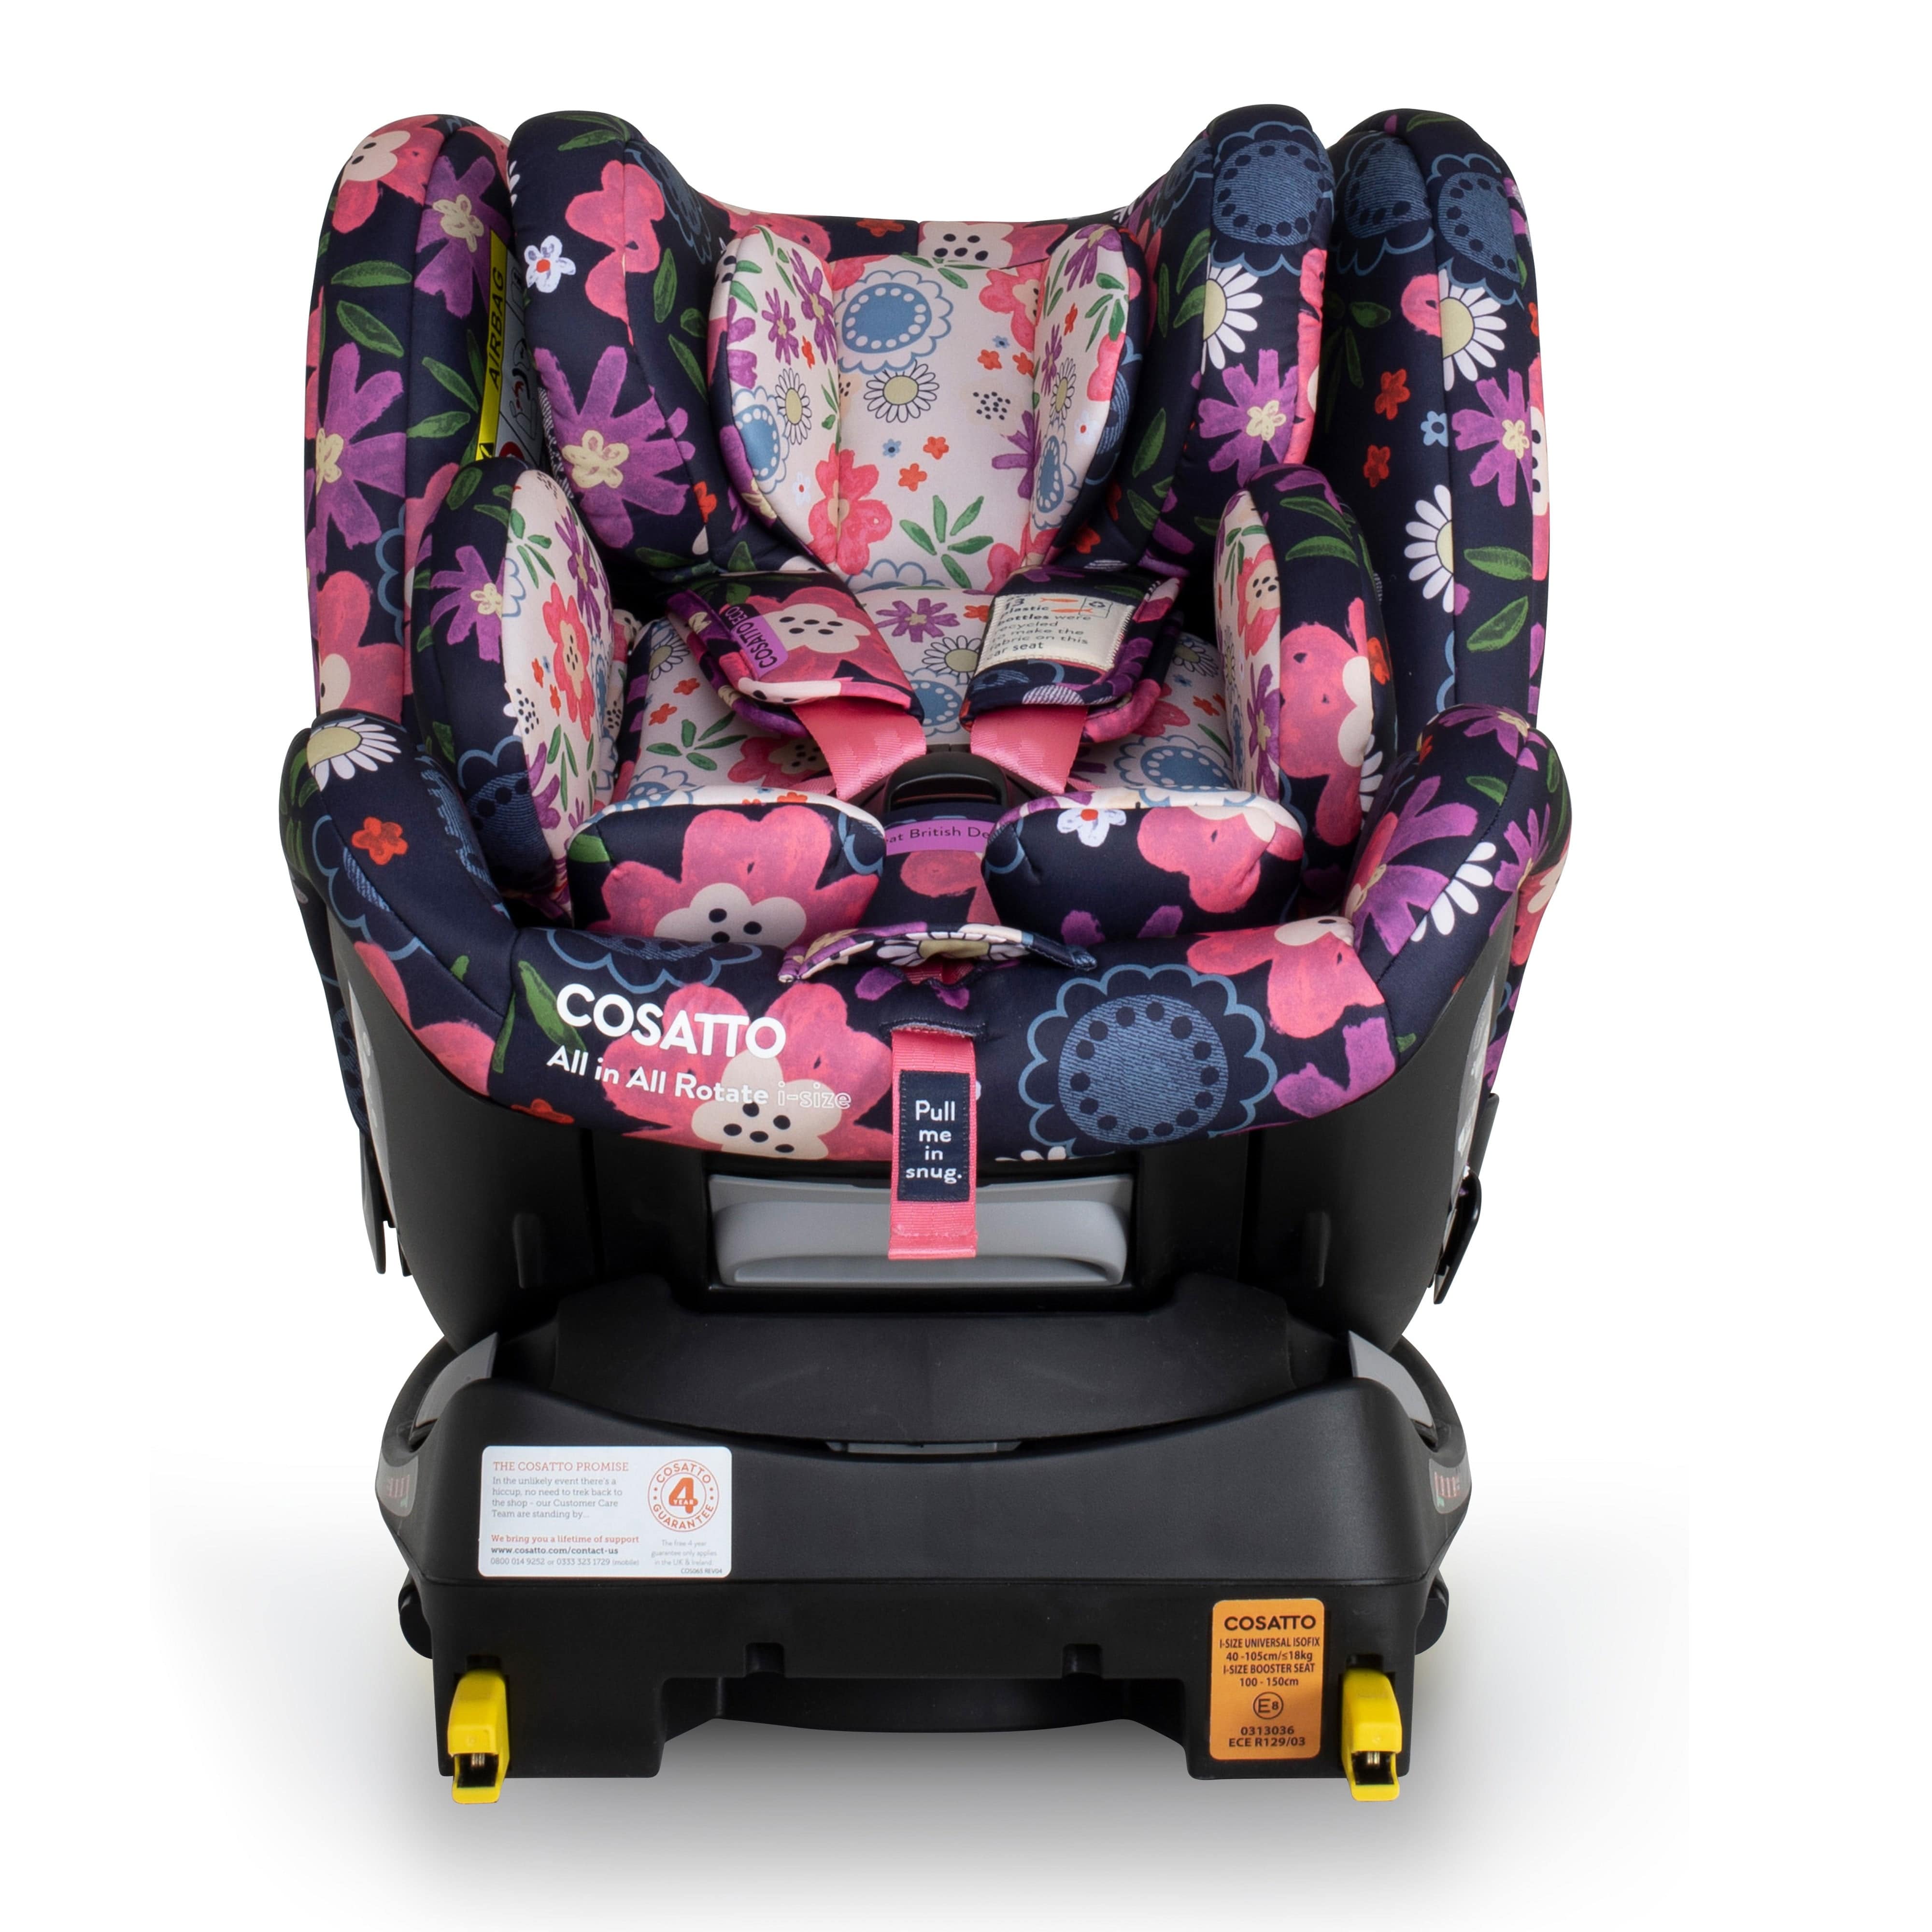 Cosatto All in All Rotate i-Size 0+/1/2/3 Car Seat Dalloway Combination Car Seats CT5219 5021645066546